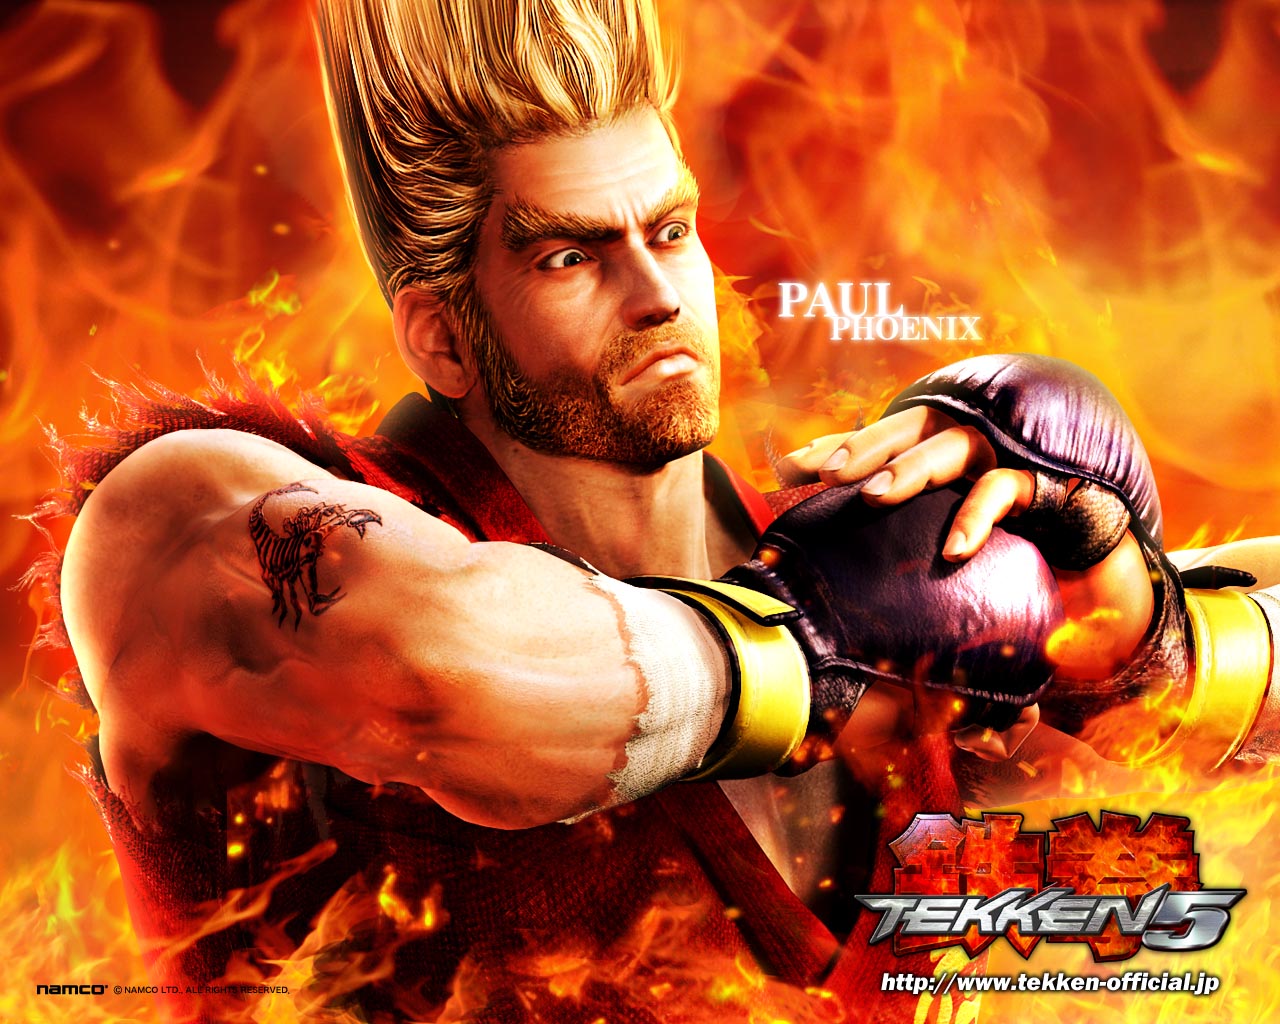 HD wallpapers Tekken 5 Game HD Wallpapers all characters in 1280x1024